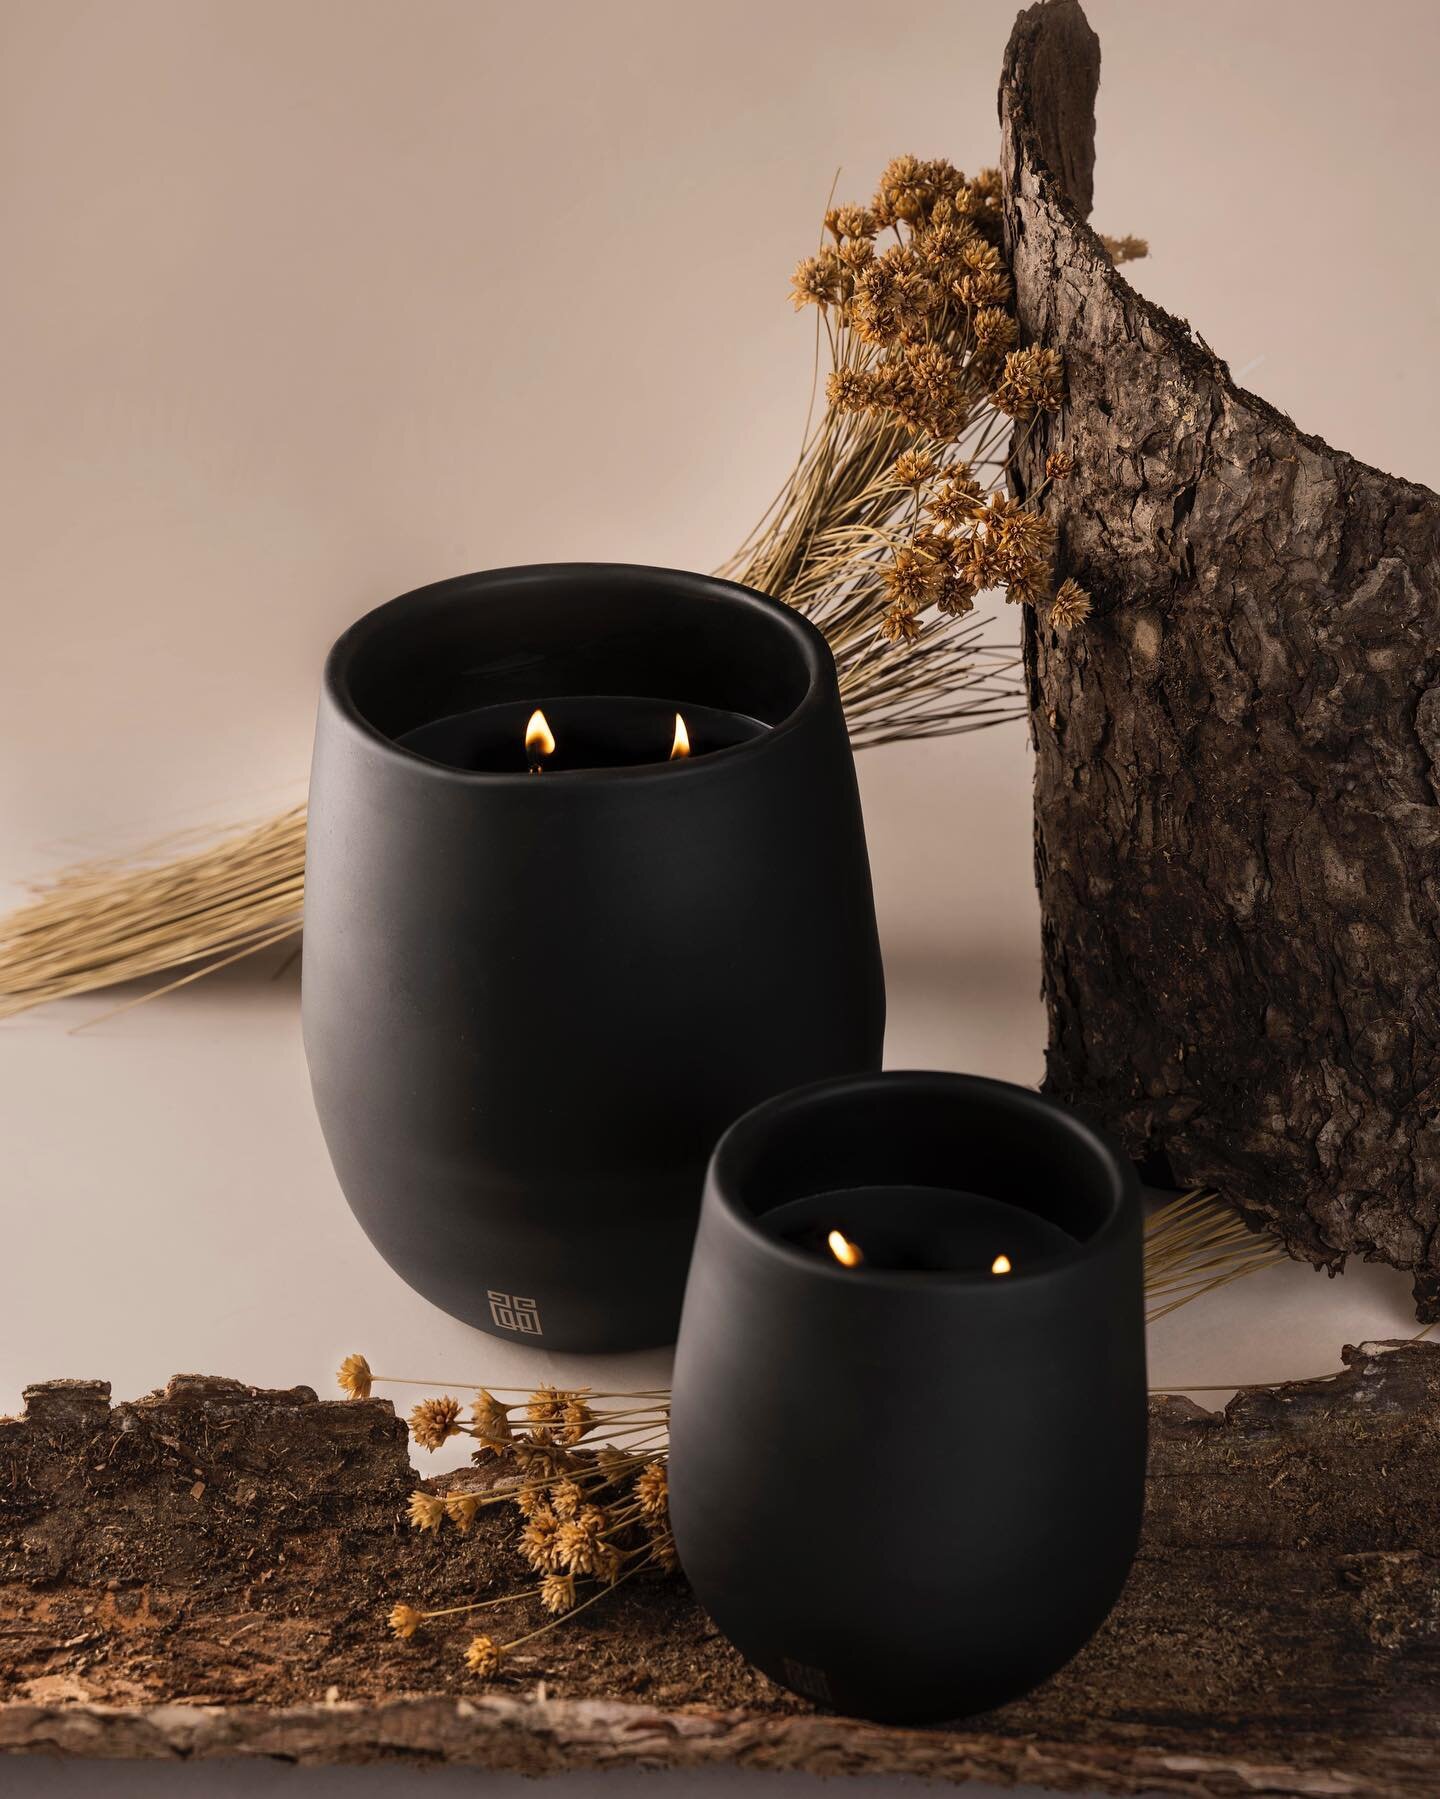 Midnight timber - The most masculine fragrance in our collection. A deep, tough and sexy fragrance that is also soothing with the addition of roses in the perfume.

#ntensecollection #candles #diffusers #chaptertwo #newfragrance